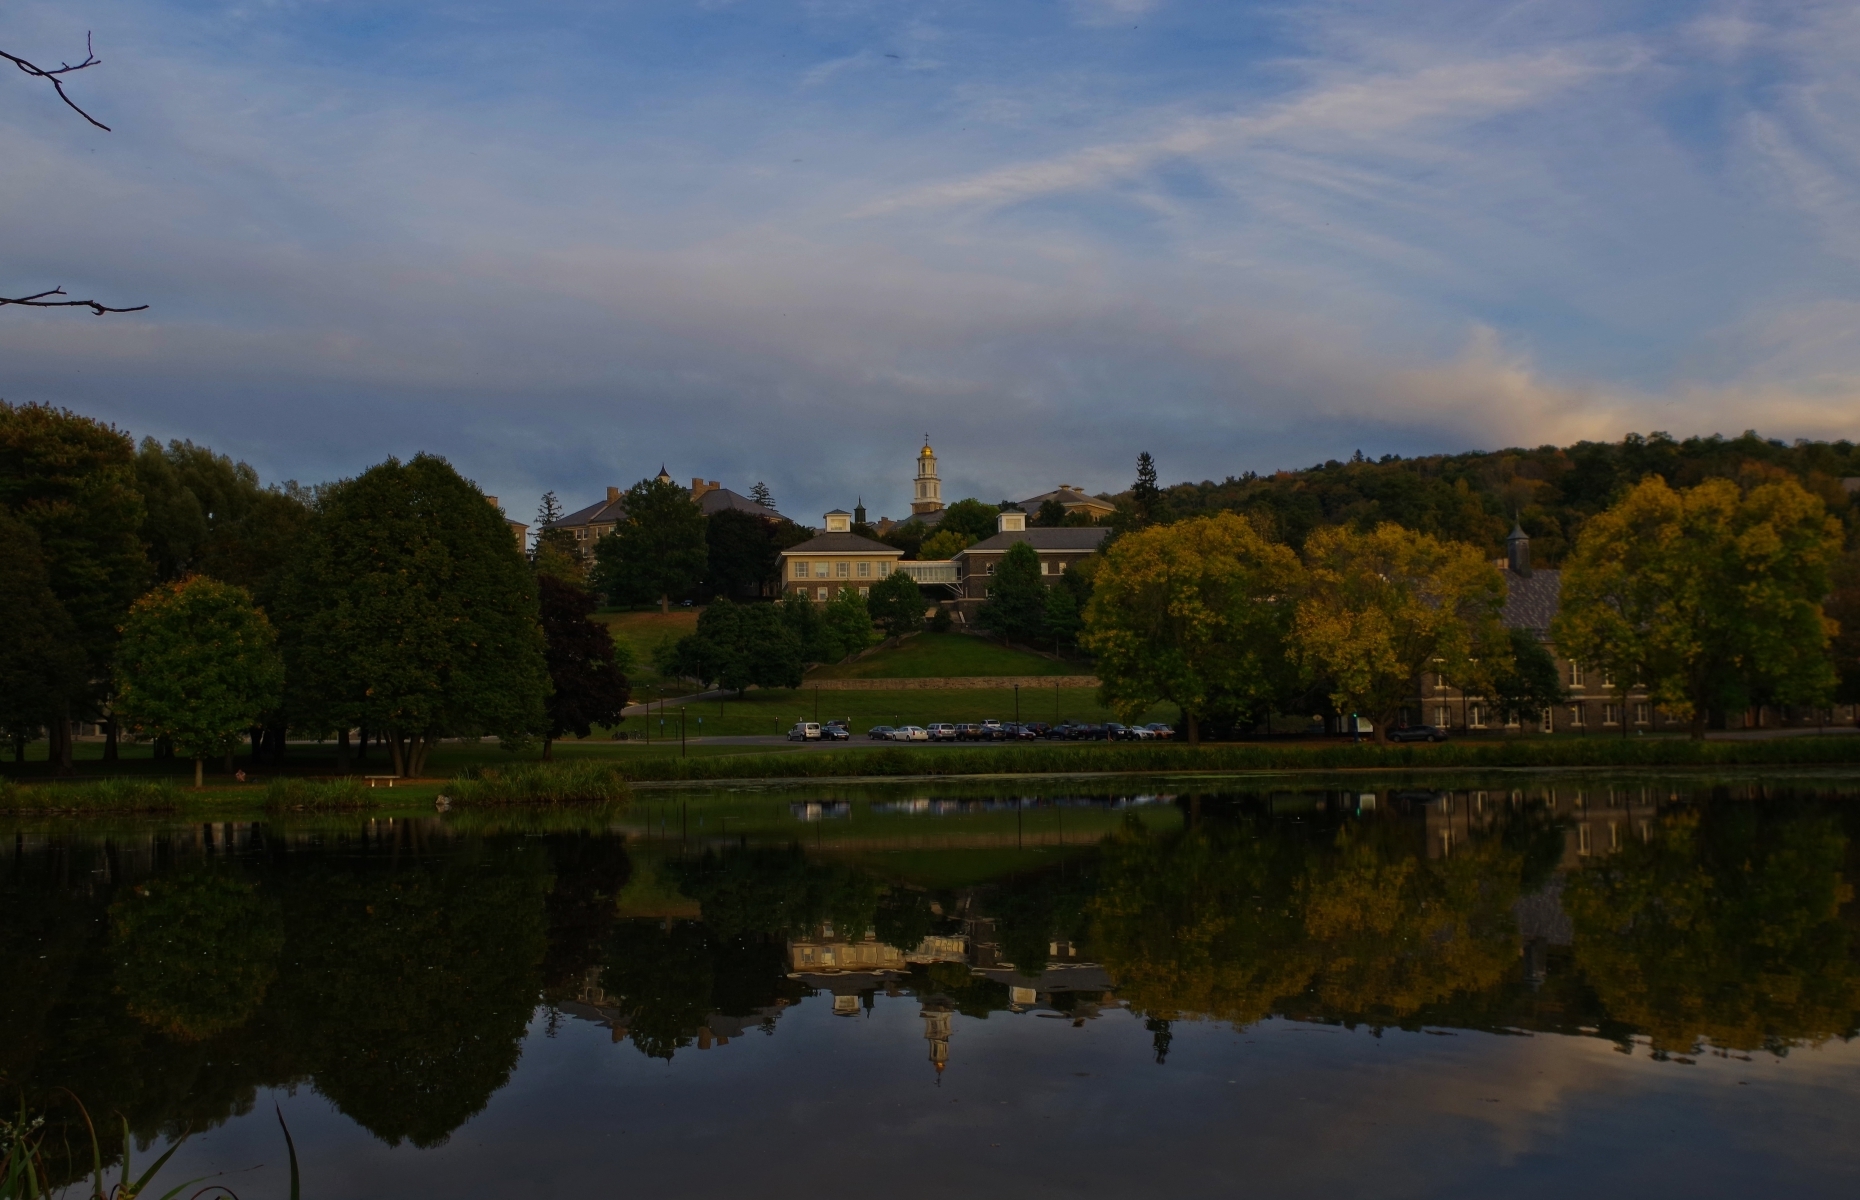 <p><a href="http://www.colgate.edu/about/colgate-campus" rel="noreferrer noopener">Colgate University</a>, on the shore of the serene Taylor Lake in rural upstate New York, has ten miles of scenic roads and walkways and lots of beautiful old stone buildings.</p>